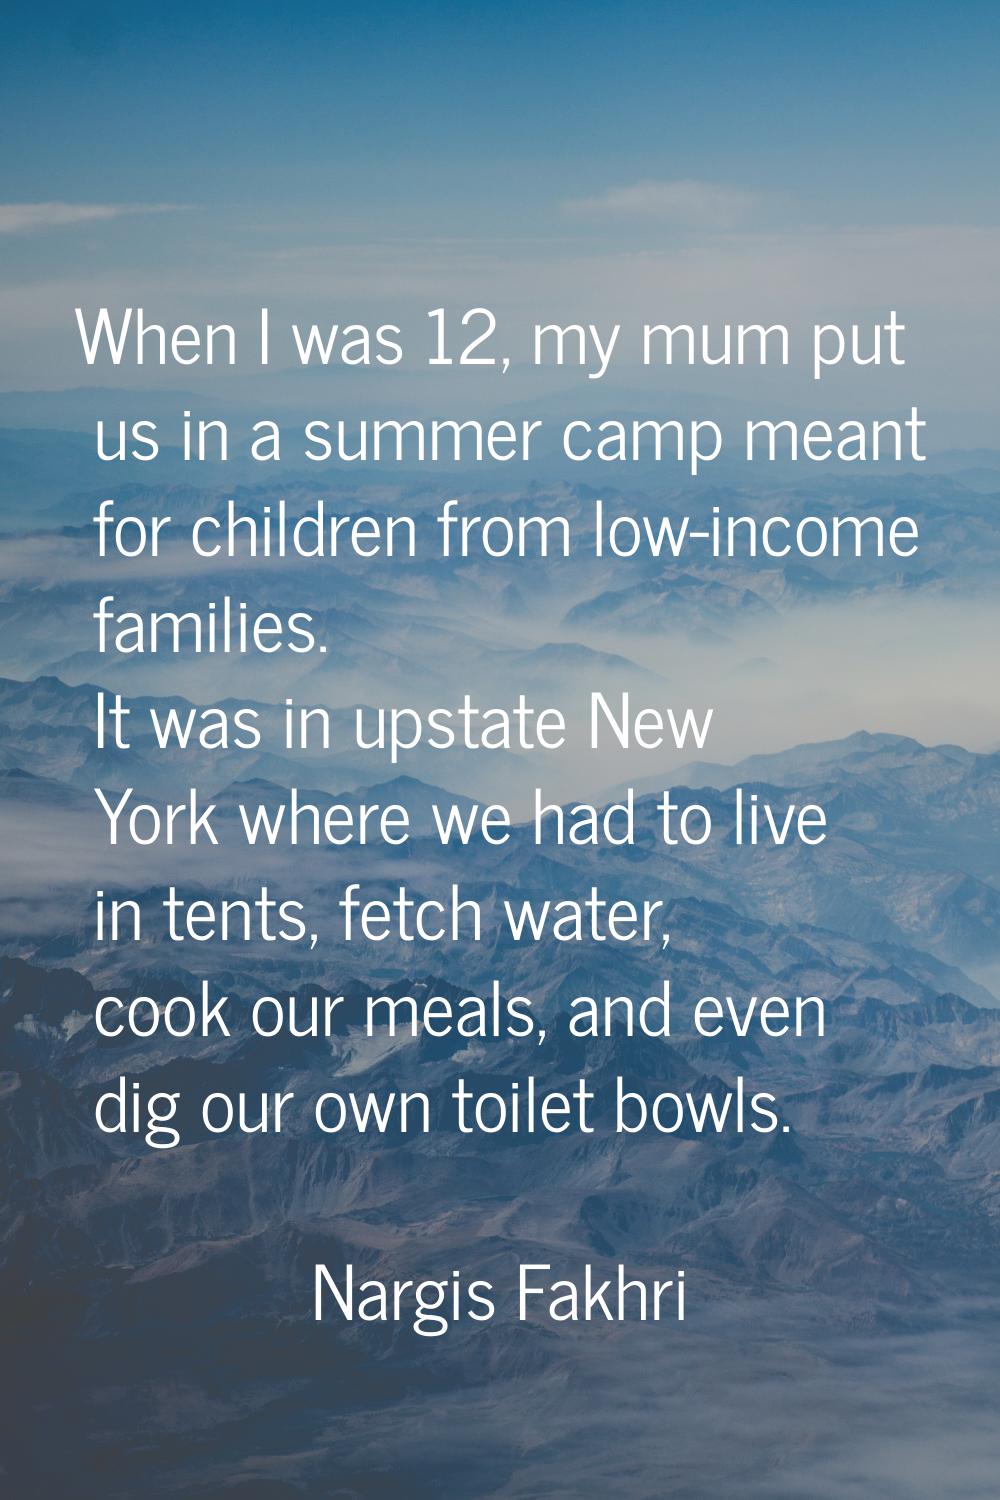 When I was 12, my mum put us in a summer camp meant for children from low-income families. It was i